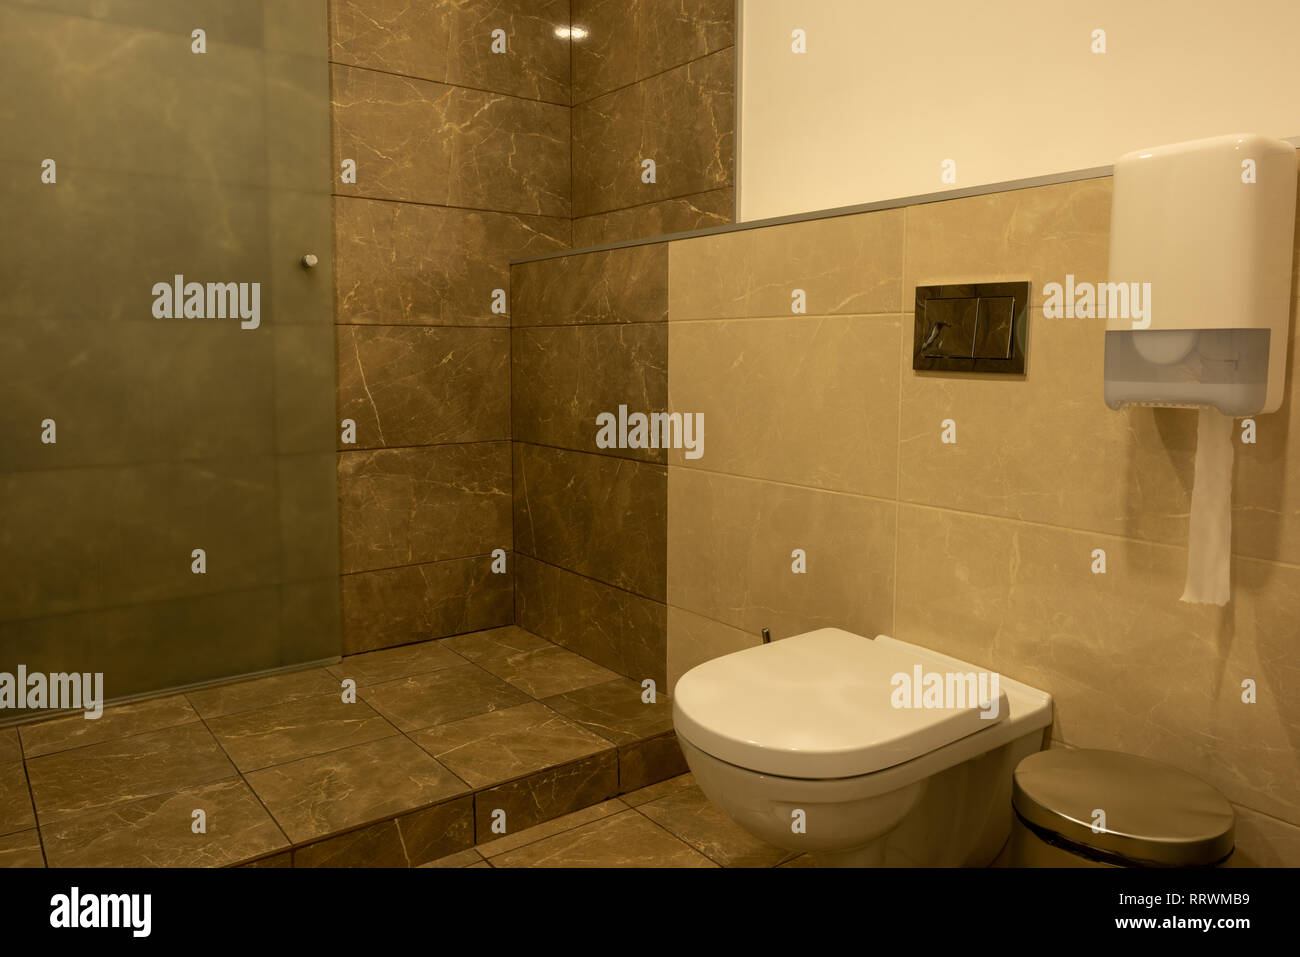 bathroom interior with shower cabin and toilet Stock Photo